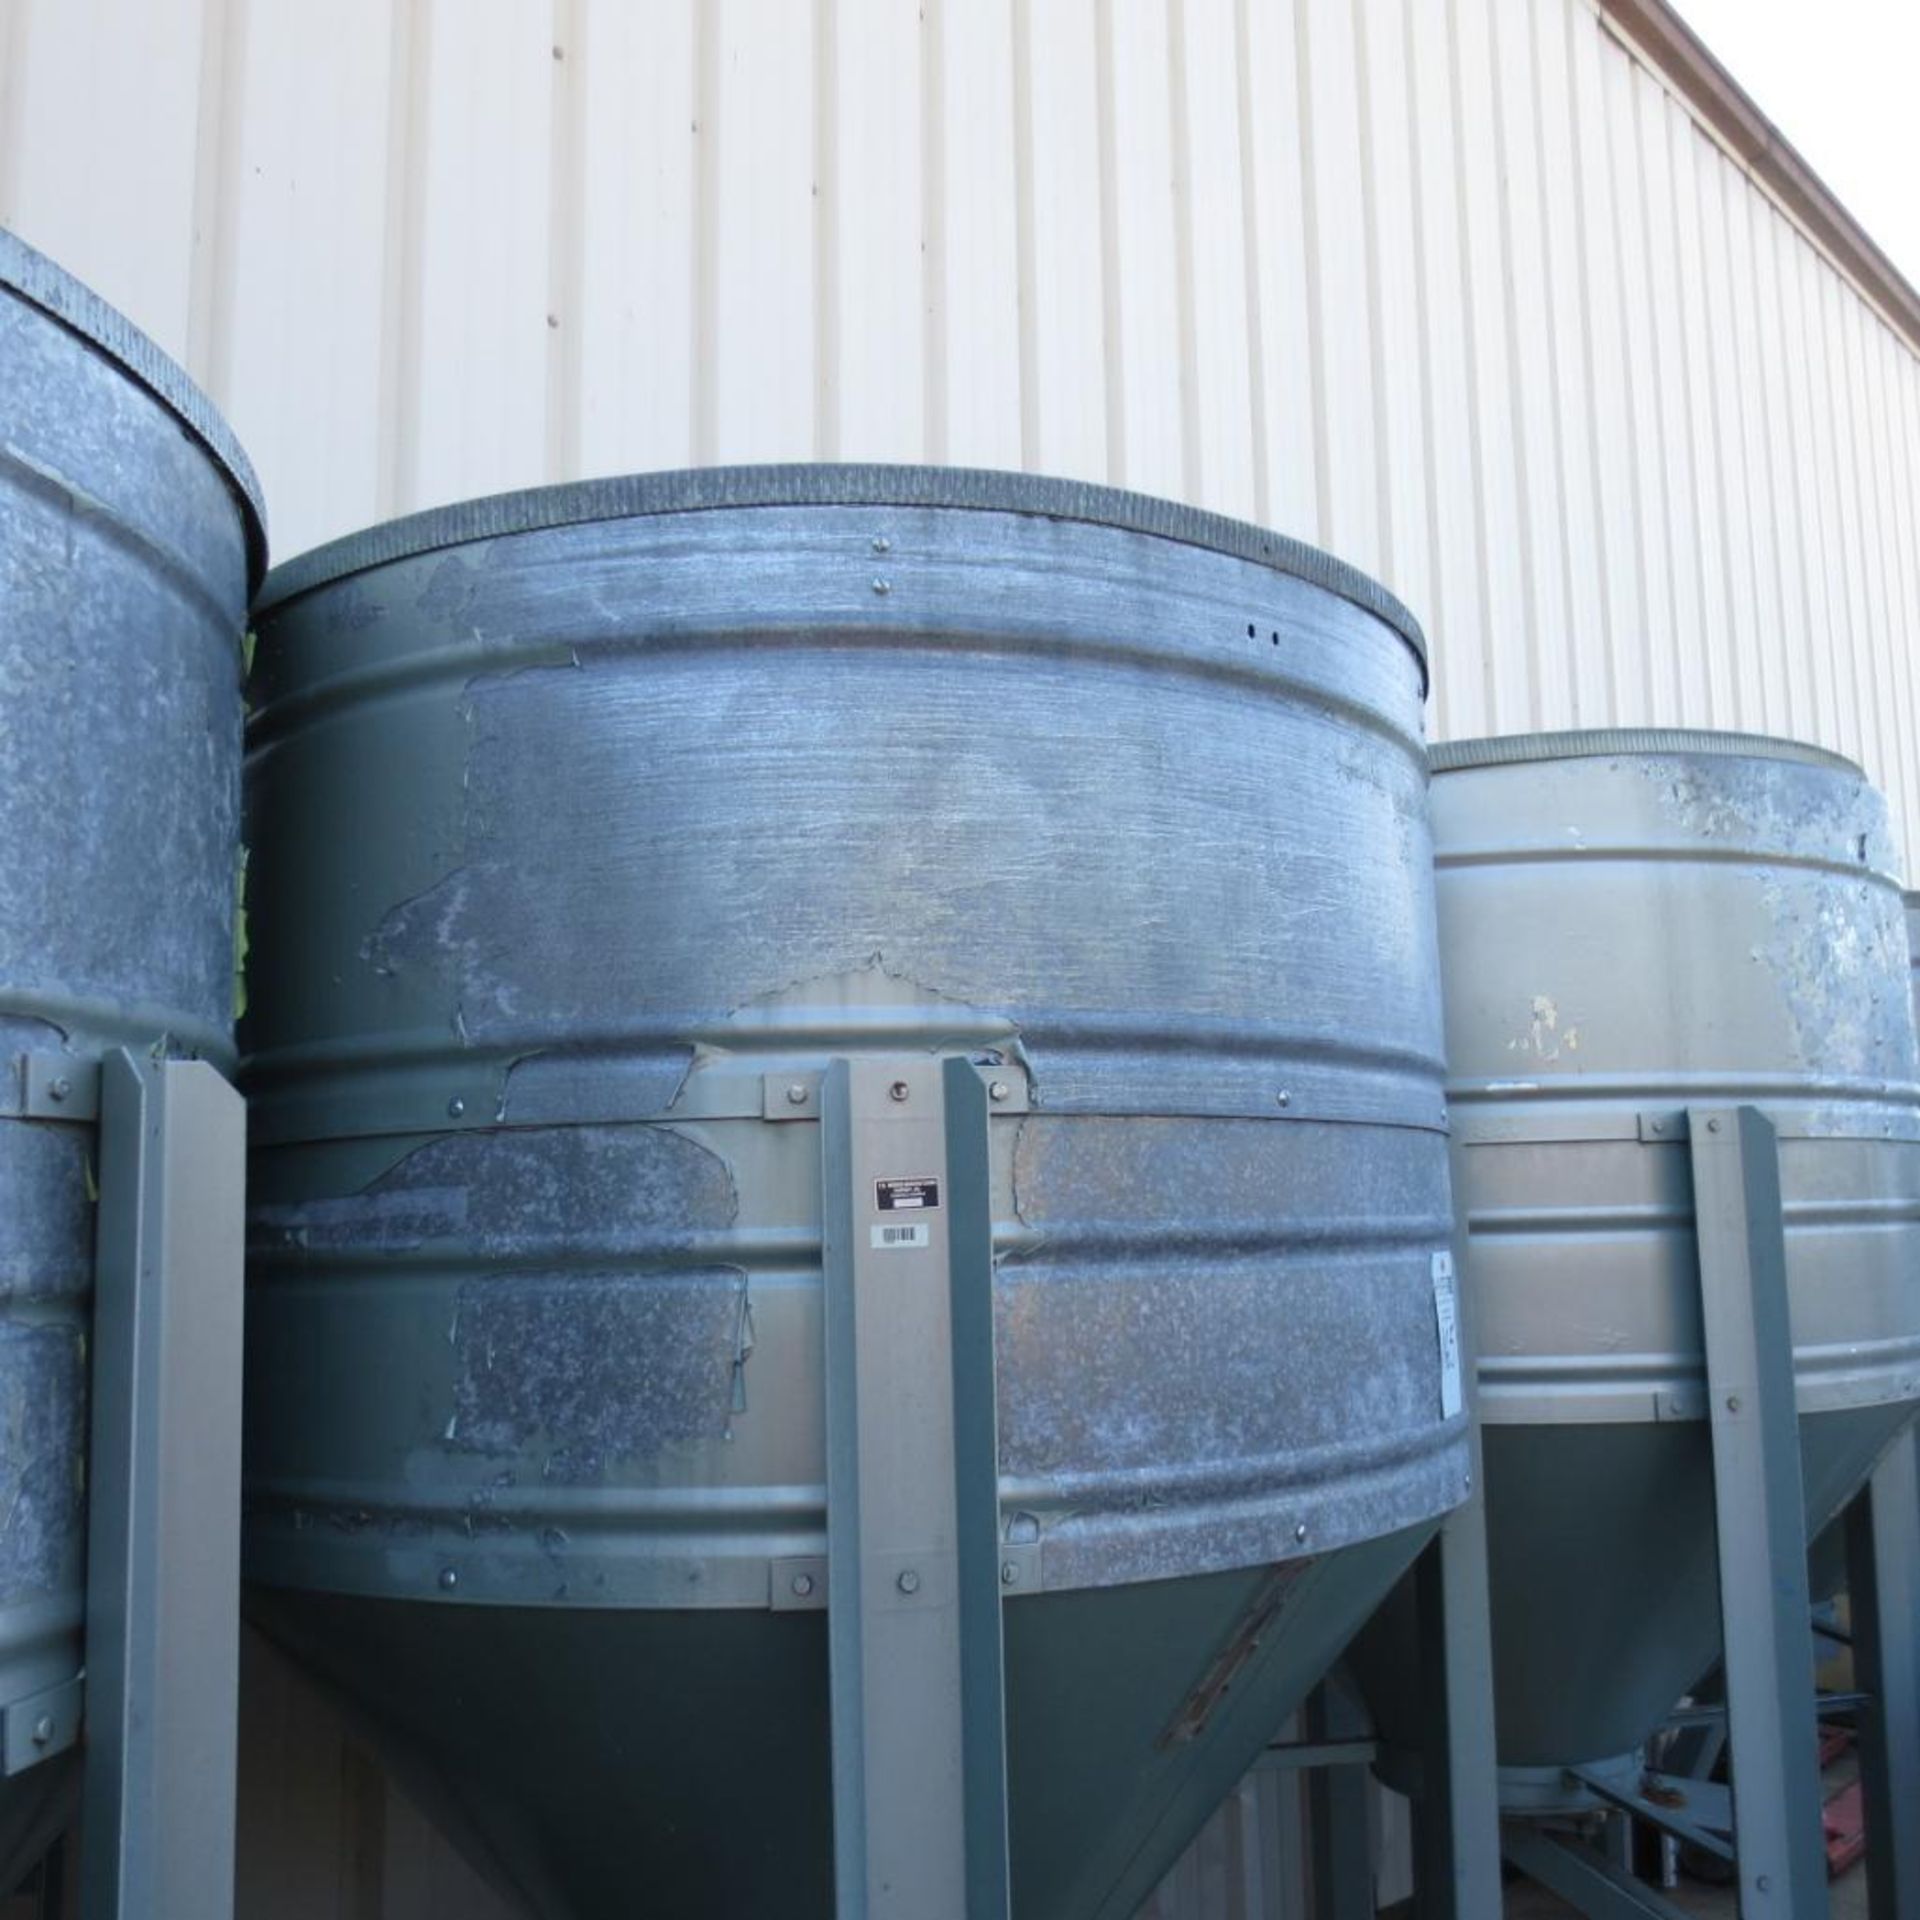 Feed Bins, 56" Wide, 3' located at 707 Burlington Ave Logansport, IN 46947 - Image 4 of 4